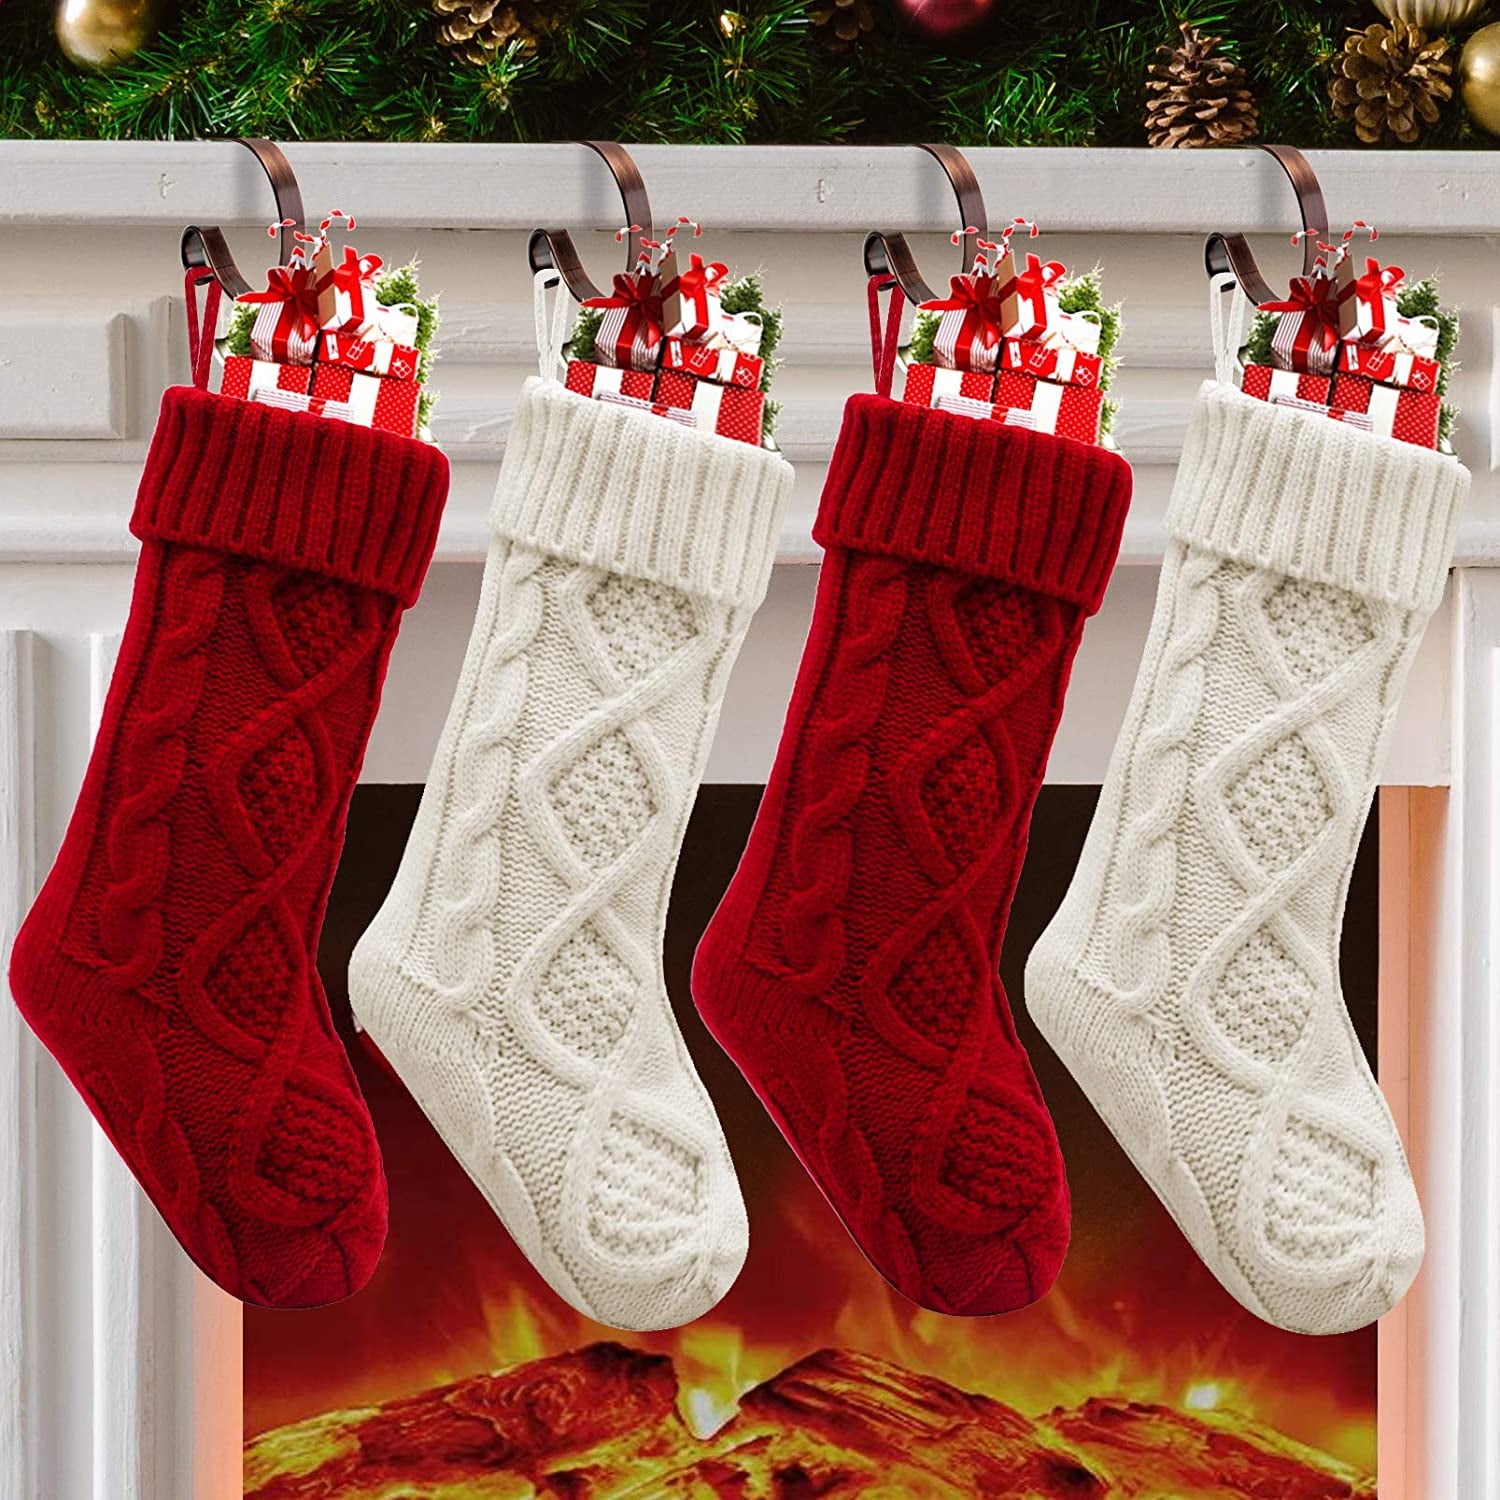  SherryDC Crochet Cable Knit Christmas Stockings 18 Hanging  Socks for Christmas Decorations, Set of 3 : Home & Kitchen